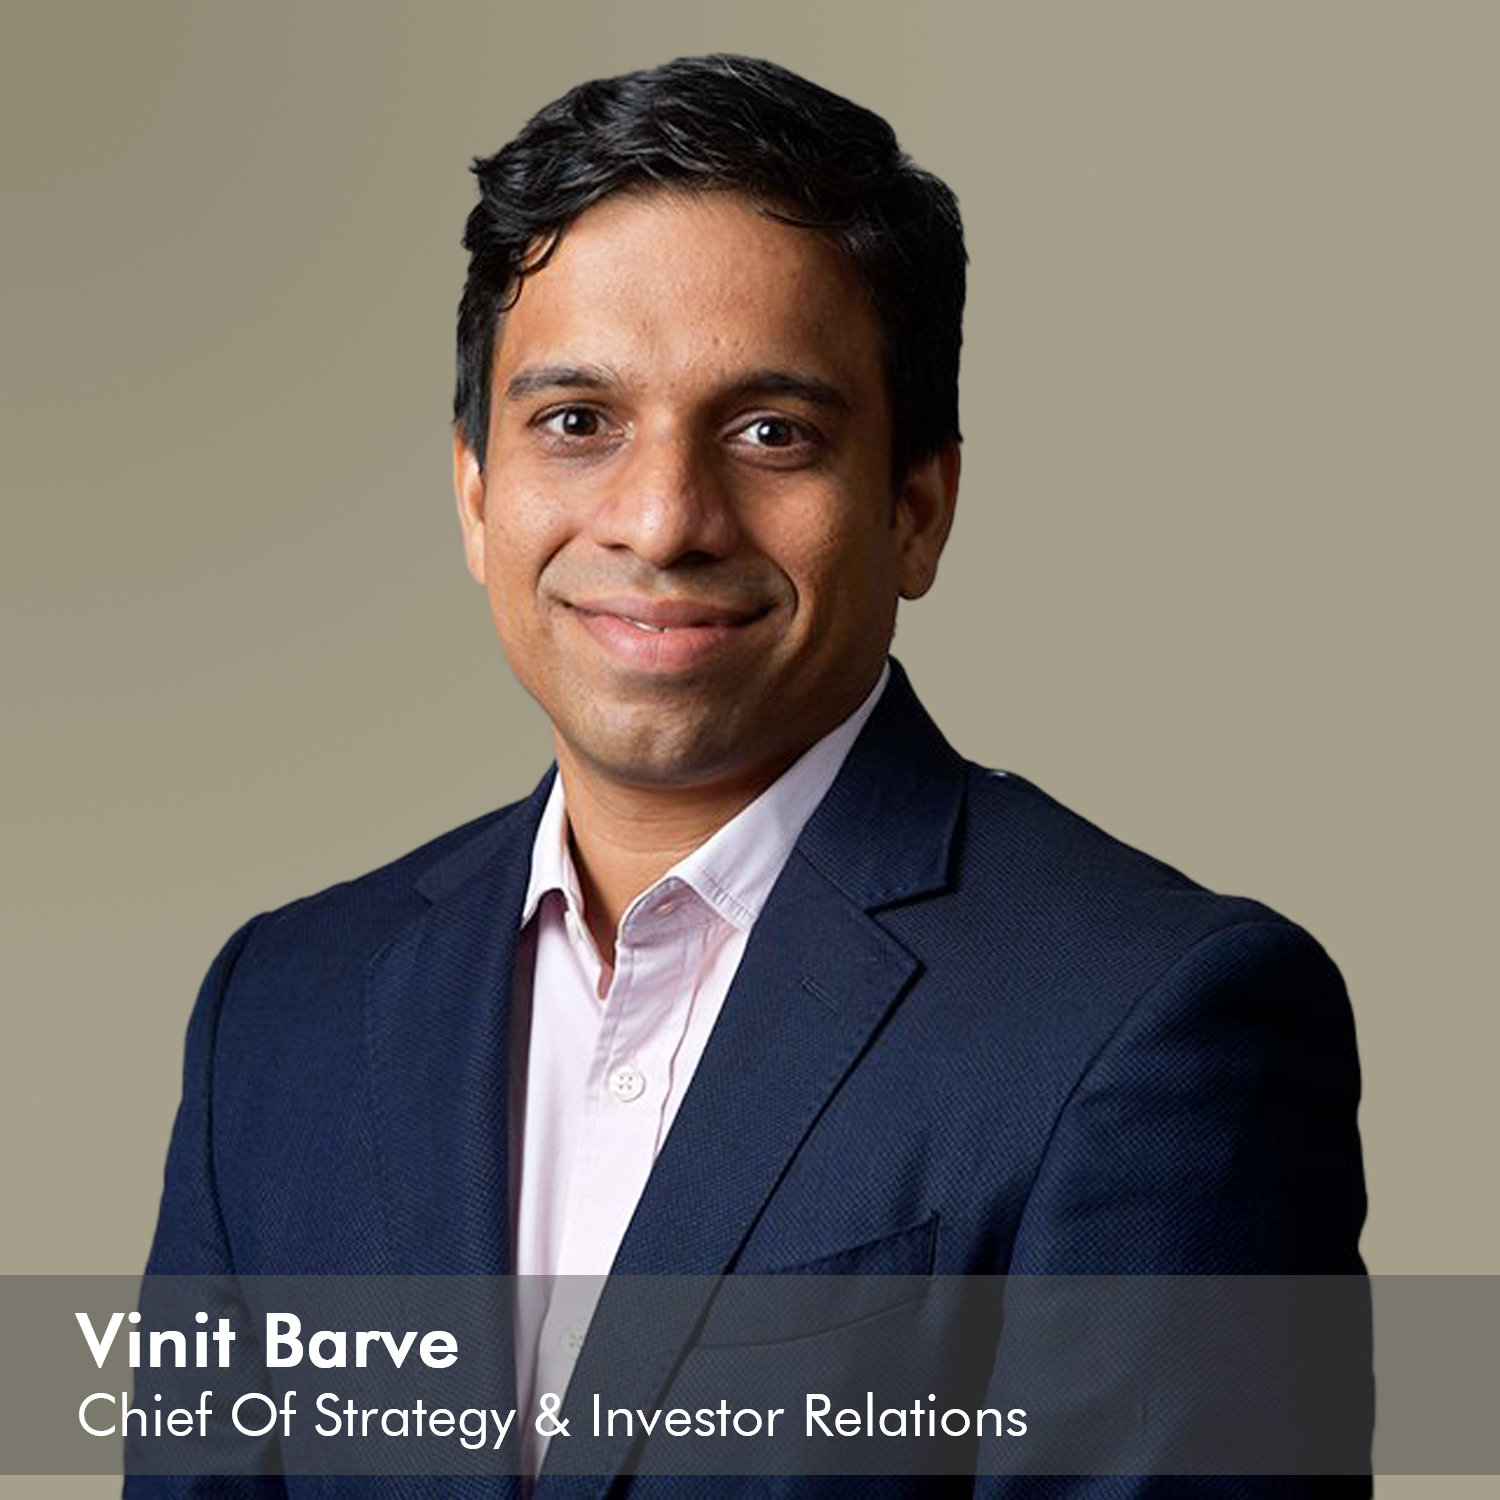 SMEcorner appoints Vinit Barve as Chief of Strategy & Investor Relations